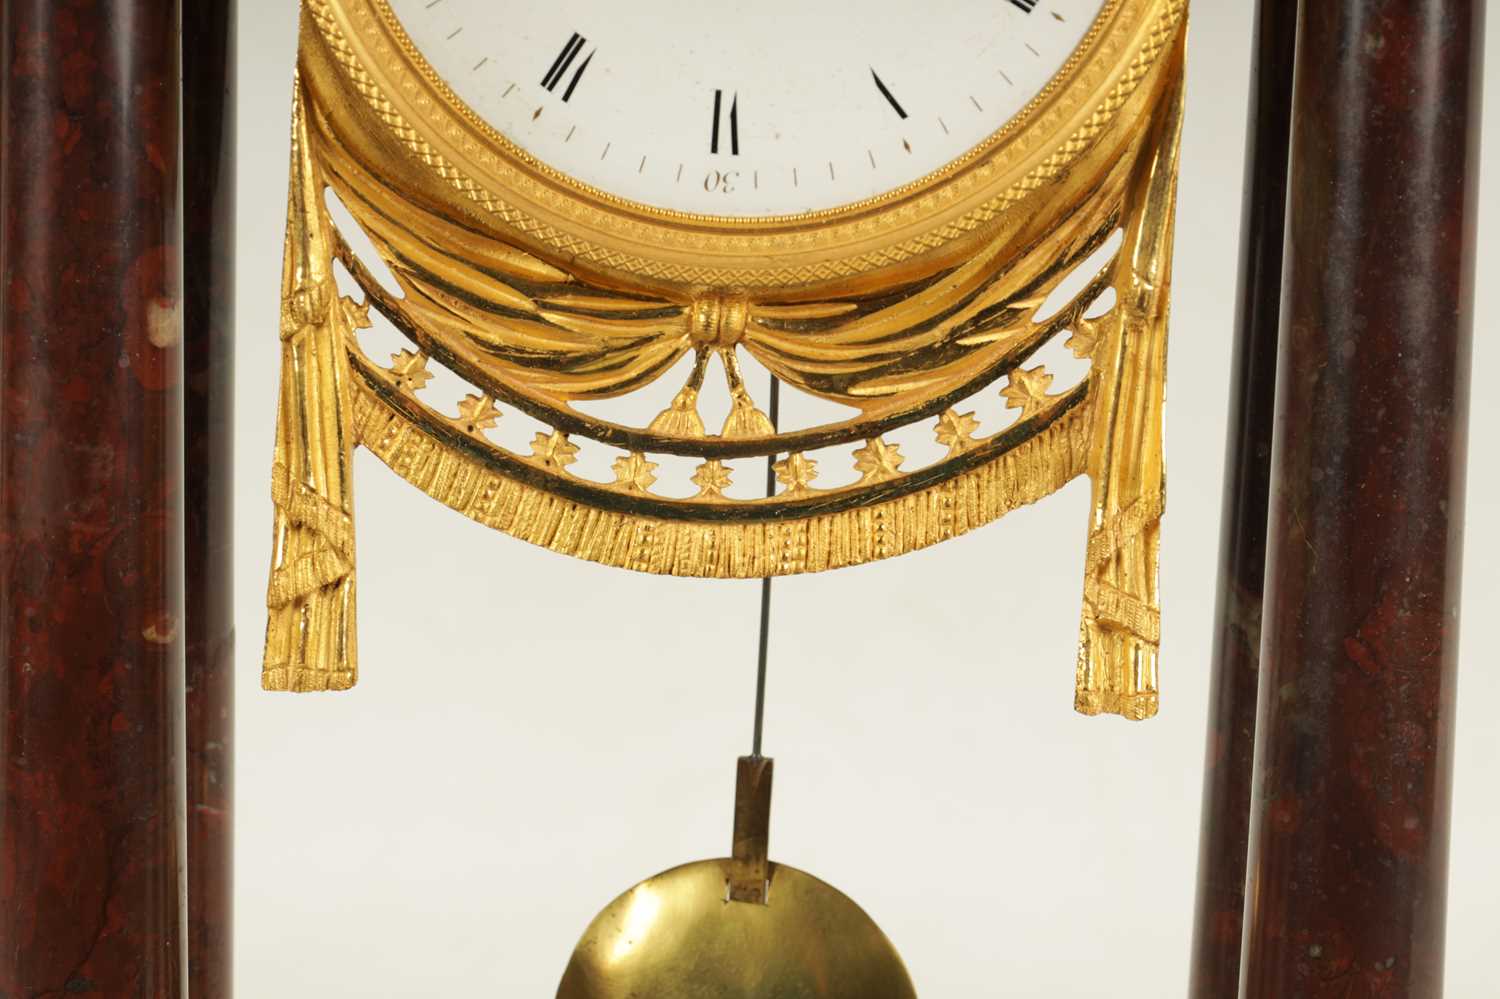 AN EARLY 19TH CENTURY FRENCH ROUGE MARBLE AND ORMOLU PORTICO MANTEL CLOCK - Image 4 of 12